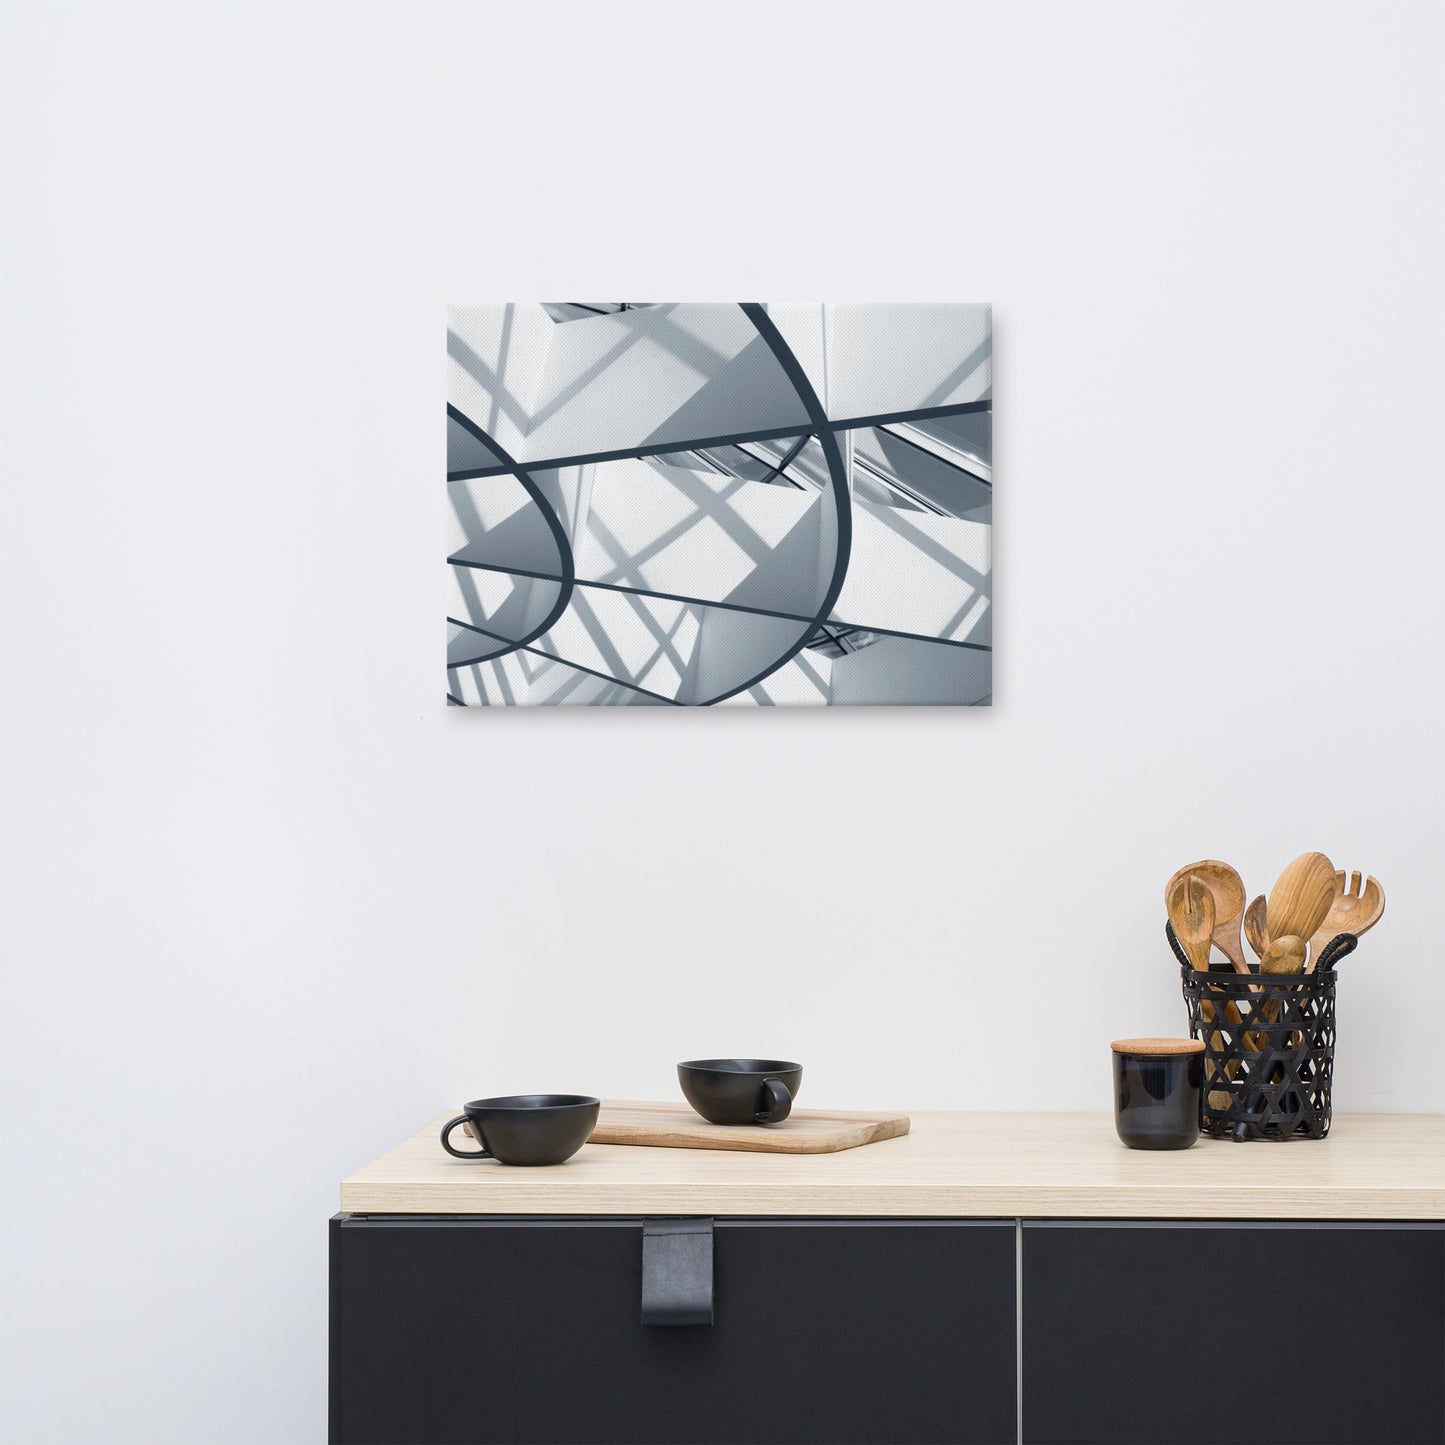 Interwoven Lines Colorized Architectural Photograph Canvas Wall Art Print